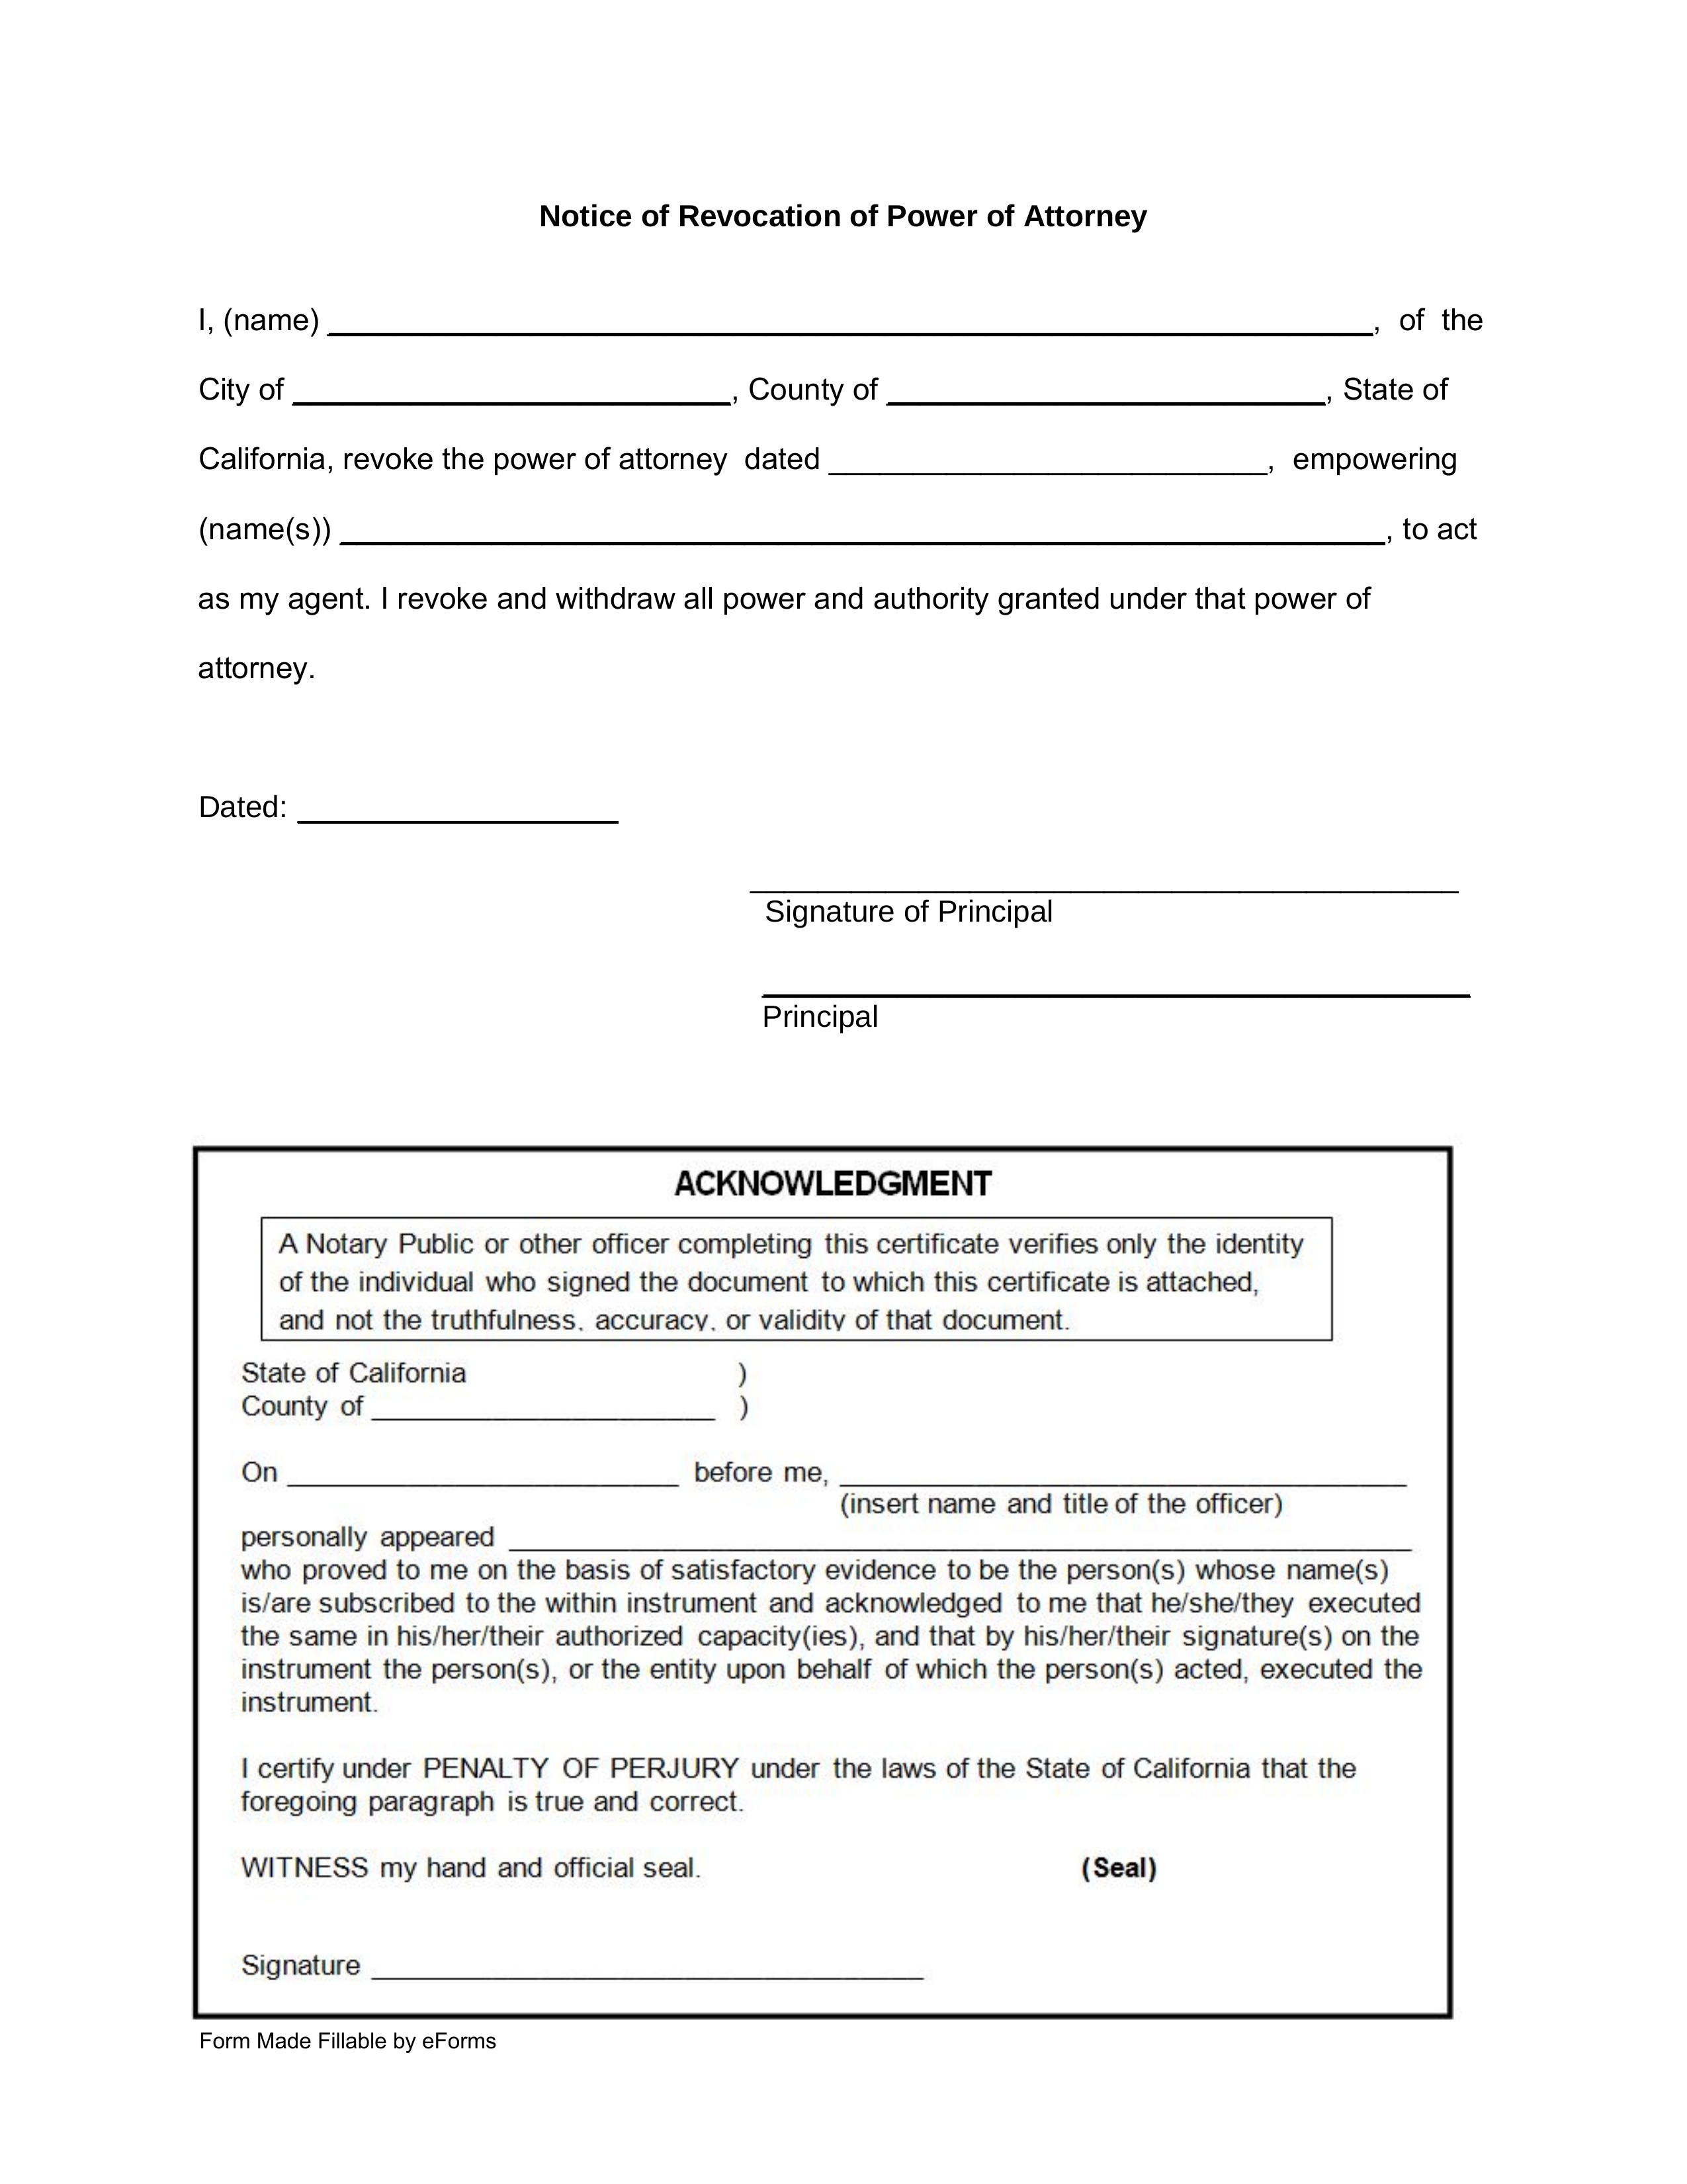 Template For Power Of Attorney Letter from eforms.com